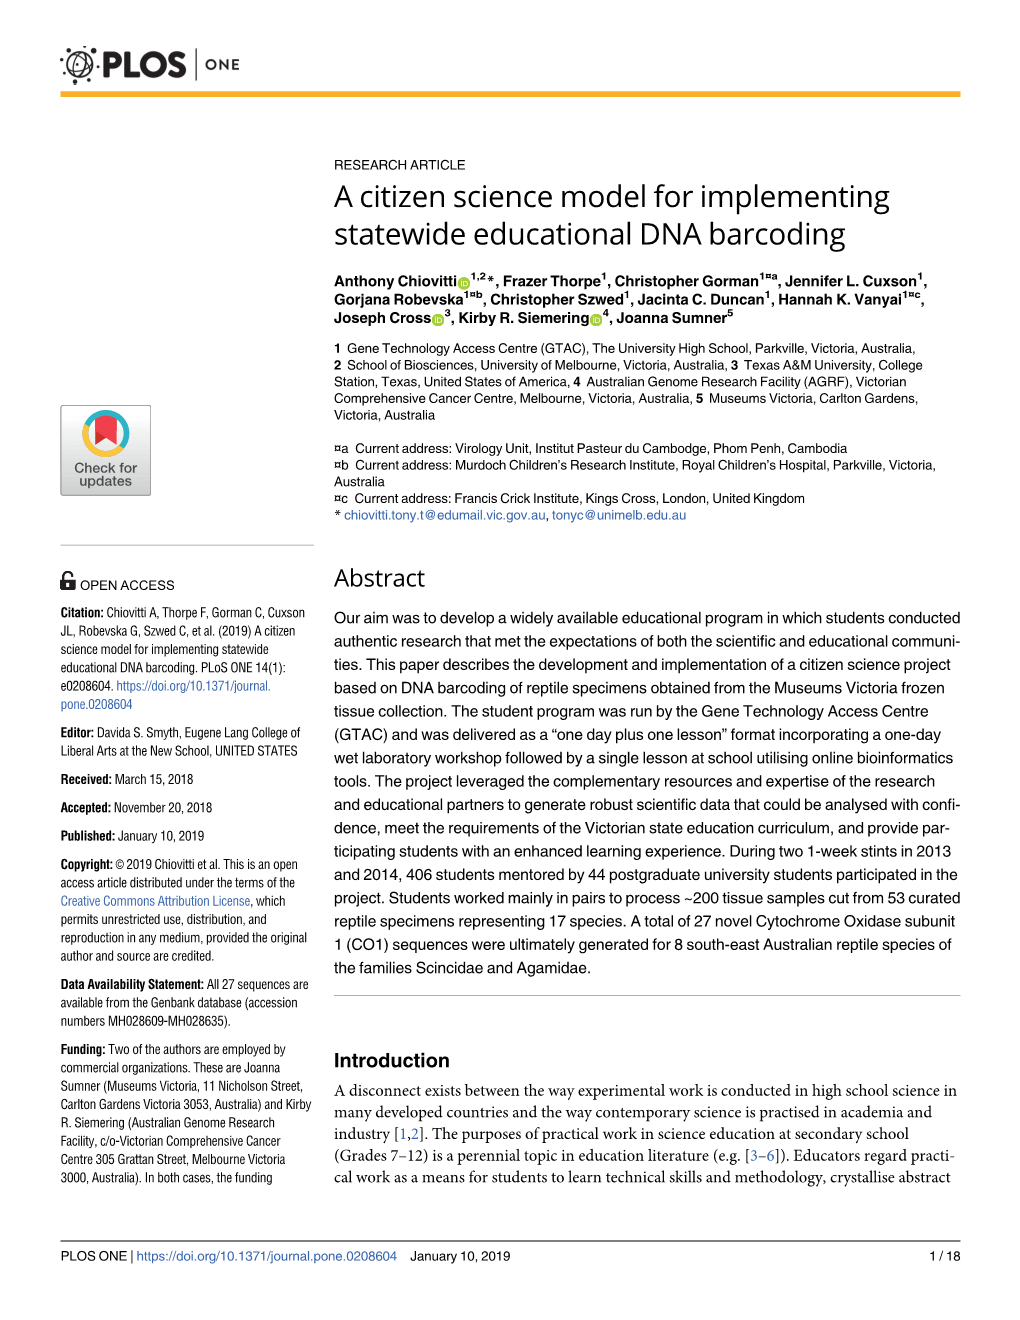 A Citizen Science Model for Implementing Statewide Educational DNA Barcoding